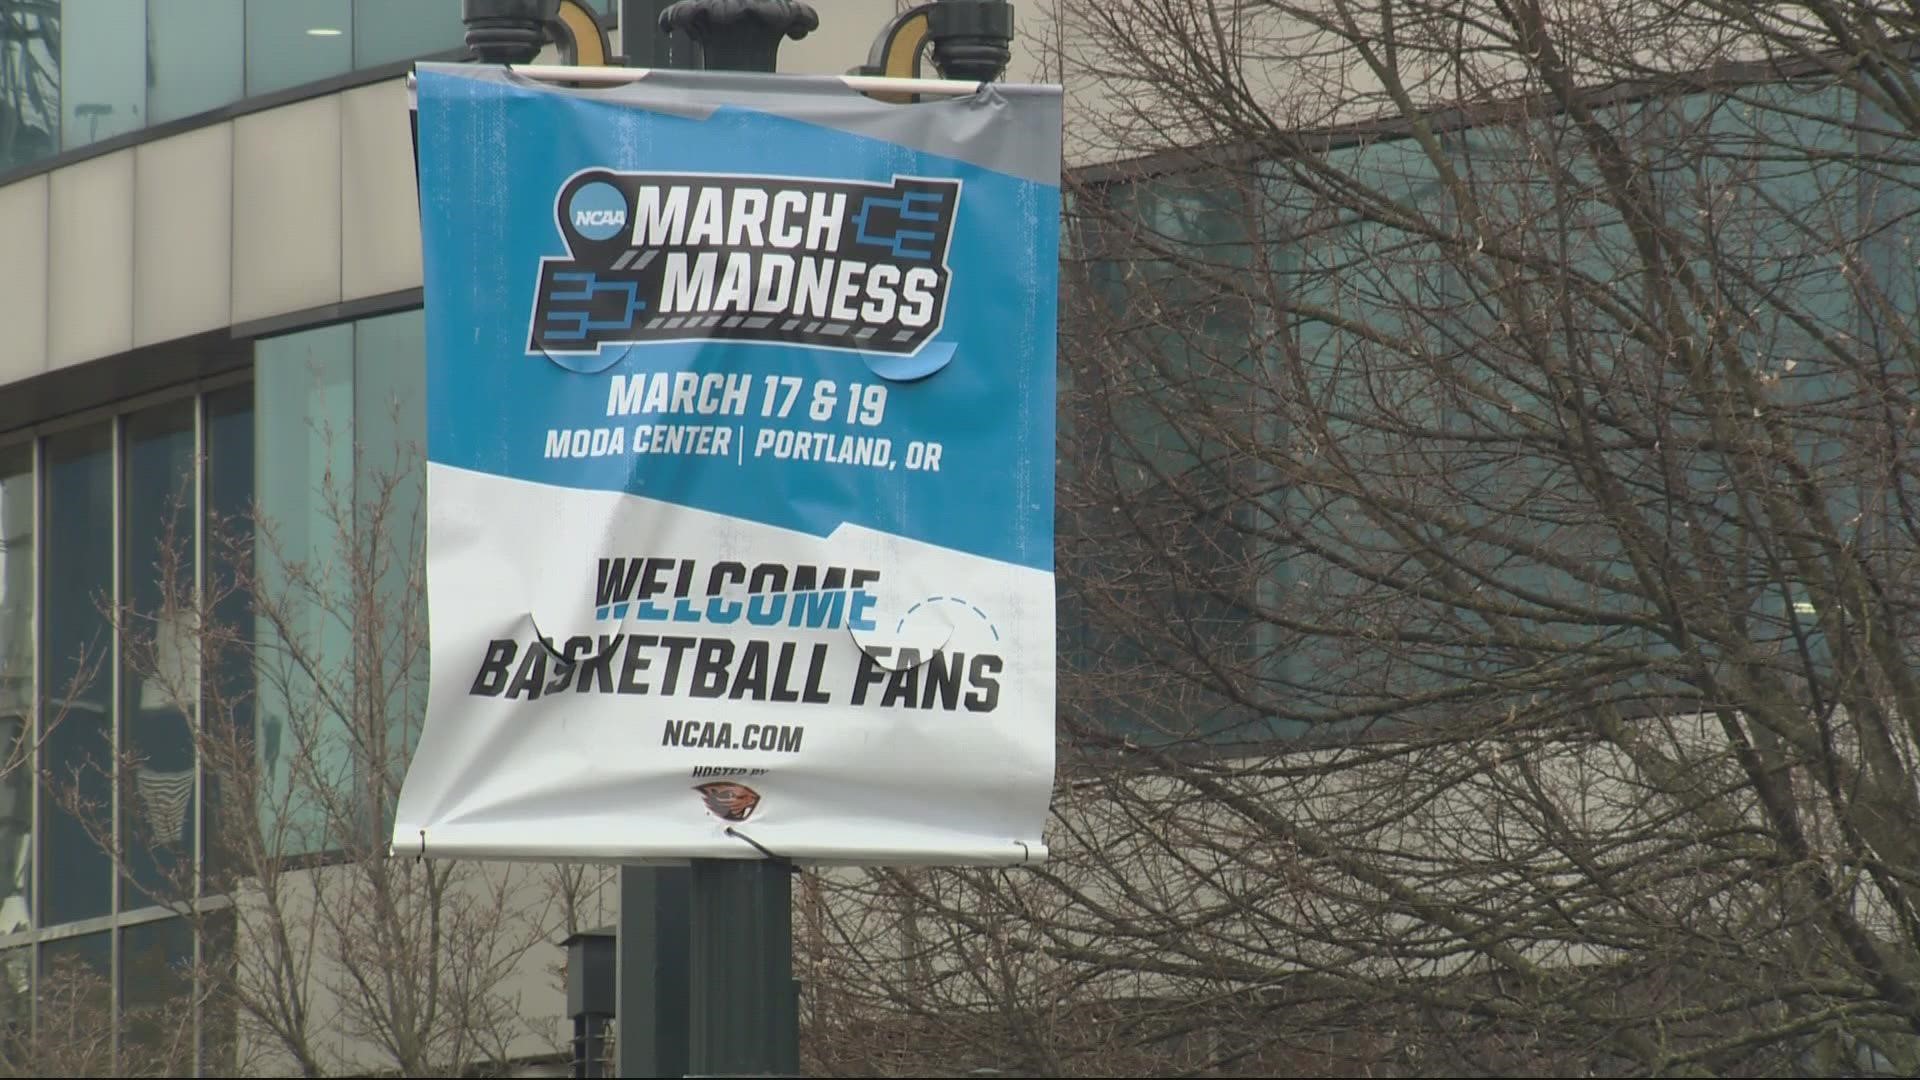 Sport Oregon helped bring the NCAA tournament to Portland, winning the bid in 2017. Organizers say it'll be a big boost financially to the city.